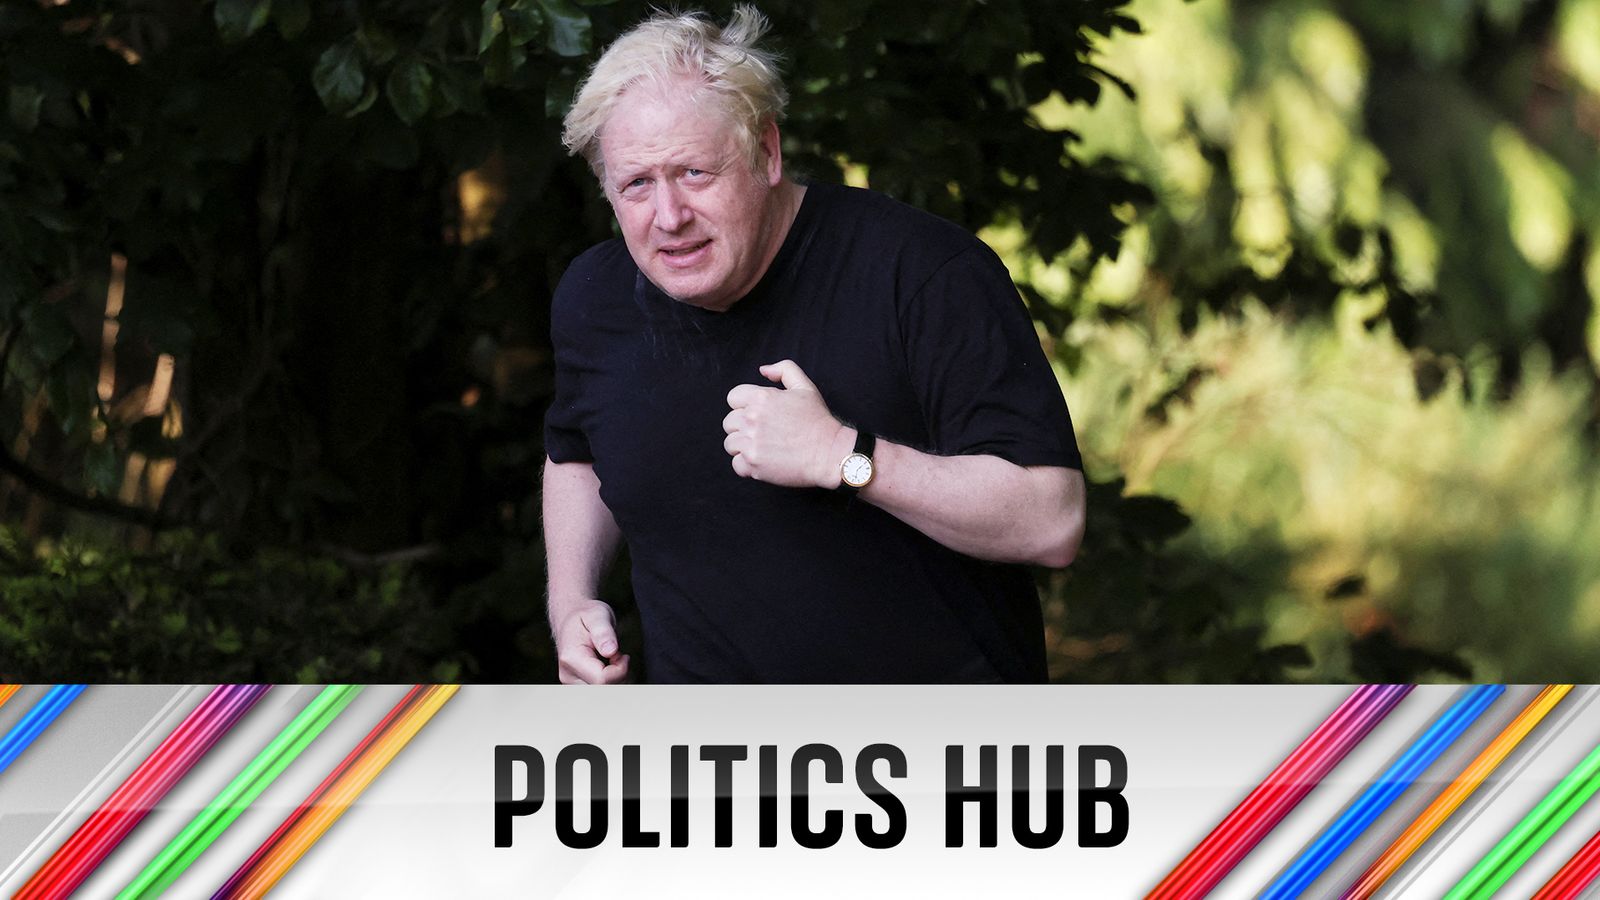 Politics latest: MPs overwhelmingly back partygate report attacking Boris Johnson – see who voted against; Rishi Sunak ‘too weak to turn up’ | Politics News